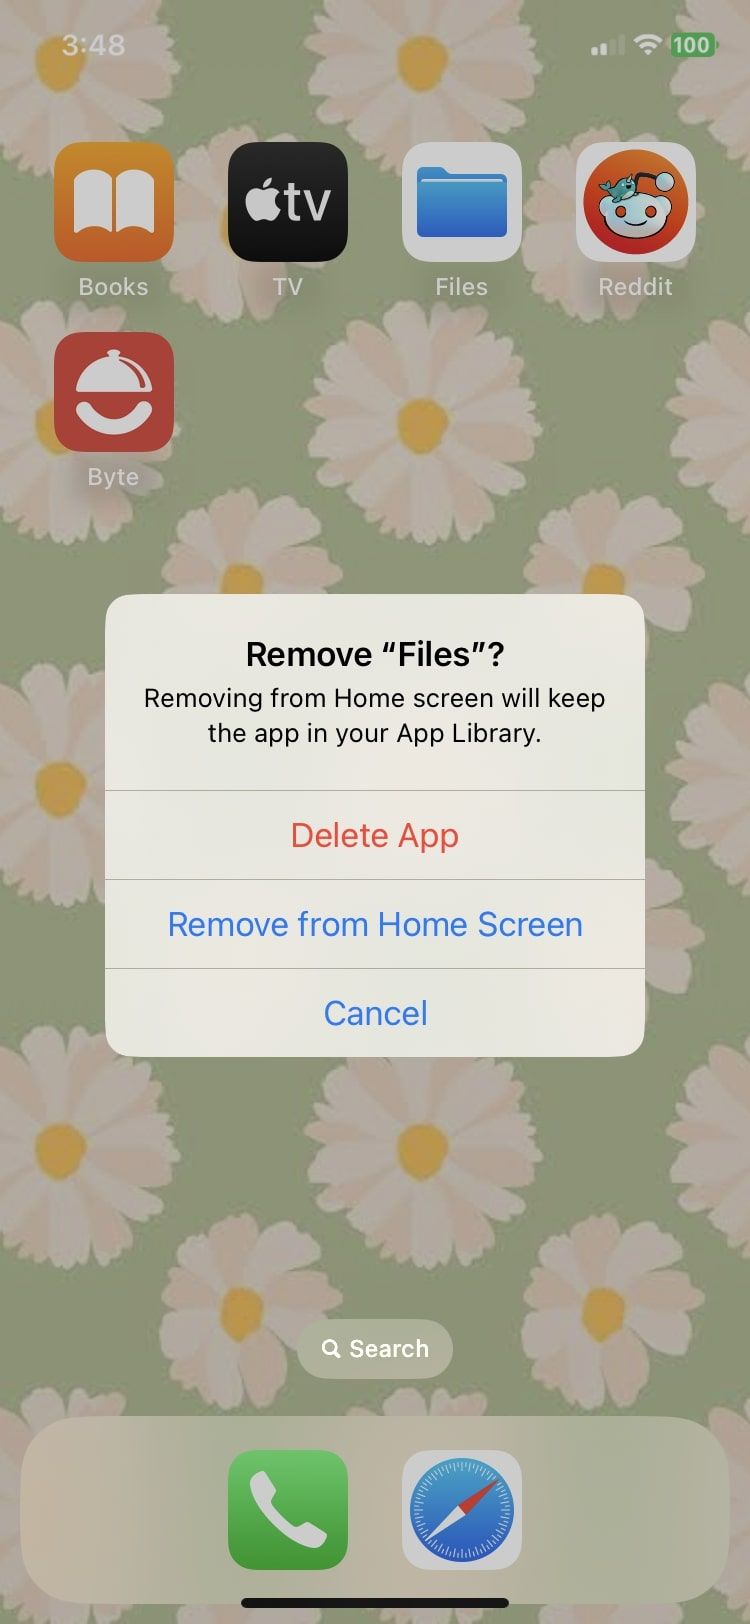 remove from home screen option